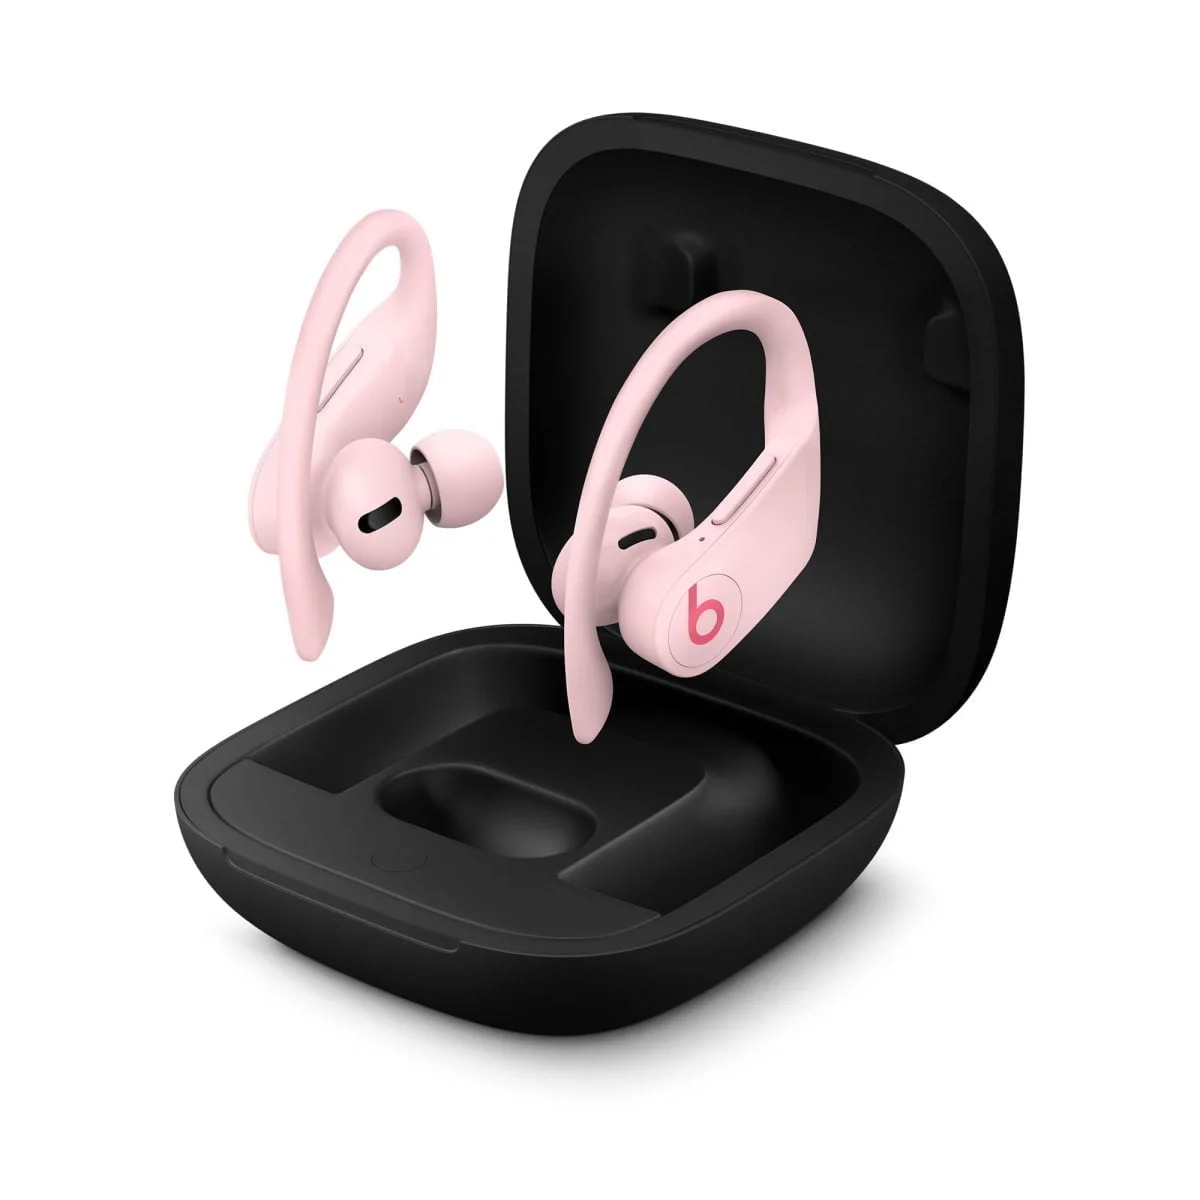 Mxy72 Av3 Apple &Lt;H1&Gt;&Lt;Span Class=&Quot;Pdp-Lrg-Header Rte-Plg-El&Quot;&Gt;Powerbeats Pro&Lt;/Span&Gt;&Lt;/H1&Gt; Powerbeats Pro, Powered By The Apple H1 Headphone Chip, Will Revolutionize The Way You Work Out. Built For Elite Athletes, These Totally Wireless Earphones Have No Wires To Hold You Back. The Adjustable, Secure-Fit Earhooks Are Customizable With Multiple Eartip Options For Extended Comfort And Are Made To Stay In Place, No Matter How Hard You Go. This Lightweight Earphone Is Built For Performance With A Reinforced Design For Ipx4-Rated Sweat And Water Resistance So You Can Take Your Workouts To The Next Level. With Up To 9 Hours Of Listening Time In Each Earbud And Powerful, Balanced Sound, You’ll Always Have Your Music To Motivate You. [Video Width=&Quot;1280&Quot; Height=&Quot;720&Quot; M4V=&Quot;Https://Lablaab.com/Wp-Content/Uploads/2020/10/Powerbeats-Pro-Totally-Wireless-Earphones-Black-Education-Apple-Ca.m4V&Quot;][/Video] &Lt;H2&Gt;&Lt;Span Style=&Quot;Color: #1B1919;Font-Size: 24Px&Quot;&Gt;Made For Movement&Lt;/Span&Gt;&Lt;/H2&Gt; &Lt;Div&Gt; &Lt;Span Class=&Quot;Pdp-Lrg-Body Rte-Plg-El&Quot;&Gt;Adjustable, Secure-Fit Earhooks Stay In Place With Multiple Eartip Options, And Are Made To Move With You, No Matter Where You Go.&Lt;/Span&Gt; &Lt;/Div&Gt; &Lt;Div&Gt; &Lt;H2&Gt;&Lt;Span Class=&Quot;Pdp-Lrg-Body Rte-Plg-El&Quot;&Gt;Sweat &Amp; Water-Resistant&Lt;/Span&Gt;&Lt;/H2&Gt; &Lt;Span Class=&Quot;Pdp-Lrg-Body Rte-Plg-El&Quot;&Gt;Reinforced Design For Sweat And Water Resistance Help You Make It Through Whatever Your Day Brings.&Lt;/Span&Gt; &Lt;/Div&Gt; &Lt;Div&Gt; &Lt;H2&Gt;&Lt;Span Class=&Quot;Pdp-Lrg-Body Rte-Plg-El&Quot;&Gt;Up To 9 Hours Of Listening Time&Lt;/Span&Gt;&Lt;/H2&Gt; &Lt;Span Class=&Quot;Pdp-Lrg-Body Rte-Plg-El&Quot;&Gt;Get More Than 24 Hours Of Combined Playback With The Charging Case, And Use 5-Minute Fast Fuel For 1.5 Hours Of Playback When Battery Is Low&Lt;Sup&Gt;1&Lt;/Sup&Gt;.&Lt;/Span&Gt; &Lt;/Div&Gt; &Lt;Div&Gt; &Lt;H2&Gt;&Lt;Span Class=&Quot;Pdp-Lrg-Body Rte-Plg-El&Quot;&Gt;Play One Side Or Both&Lt;/Span&Gt;&Lt;/H2&Gt; &Lt;Span Class=&Quot;Pdp-Lrg-Body Rte-Plg-El&Quot;&Gt;Auto Play/Pause, Independent Earbud Connection Via The Apple H1 Chip, And Full Volume And Track Controls On Each Earbud Mean You’re In Charge Of How You Listen.&Lt;/Span&Gt; &Lt;/Div&Gt; &Lt;H3 Class=&Quot;Pdp-Detail-Title Pdp-Lrg-Body-B&Quot;&Gt;In The Box&Lt;/H3&Gt; &Lt;Div&Gt; &Lt;Ul Class=&Quot;Pdp-Lrg-Body&Quot;&Gt; &Lt;Li&Gt;Powerbeats Pro Totally Wireless Earphones&Lt;/Li&Gt; &Lt;Li&Gt;Charging Case&Lt;/Li&Gt; &Lt;Li&Gt;Eartips With Four Size Options&Lt;/Li&Gt; &Lt;Li&Gt;Lightning To Usb-A Charging Cable&Lt;/Li&Gt; &Lt;Li&Gt;Quick Start Guide&Lt;/Li&Gt; &Lt;Li&Gt;Warranty Card (One Year Manufacturer Warranty)&Lt;/Li&Gt; &Lt;/Ul&Gt; &Lt;/Div&Gt; Powerbeats Pro Powerbeats Pro In-Ear Wireless Headphones Beats By Dr. Dre - Cloud Pink